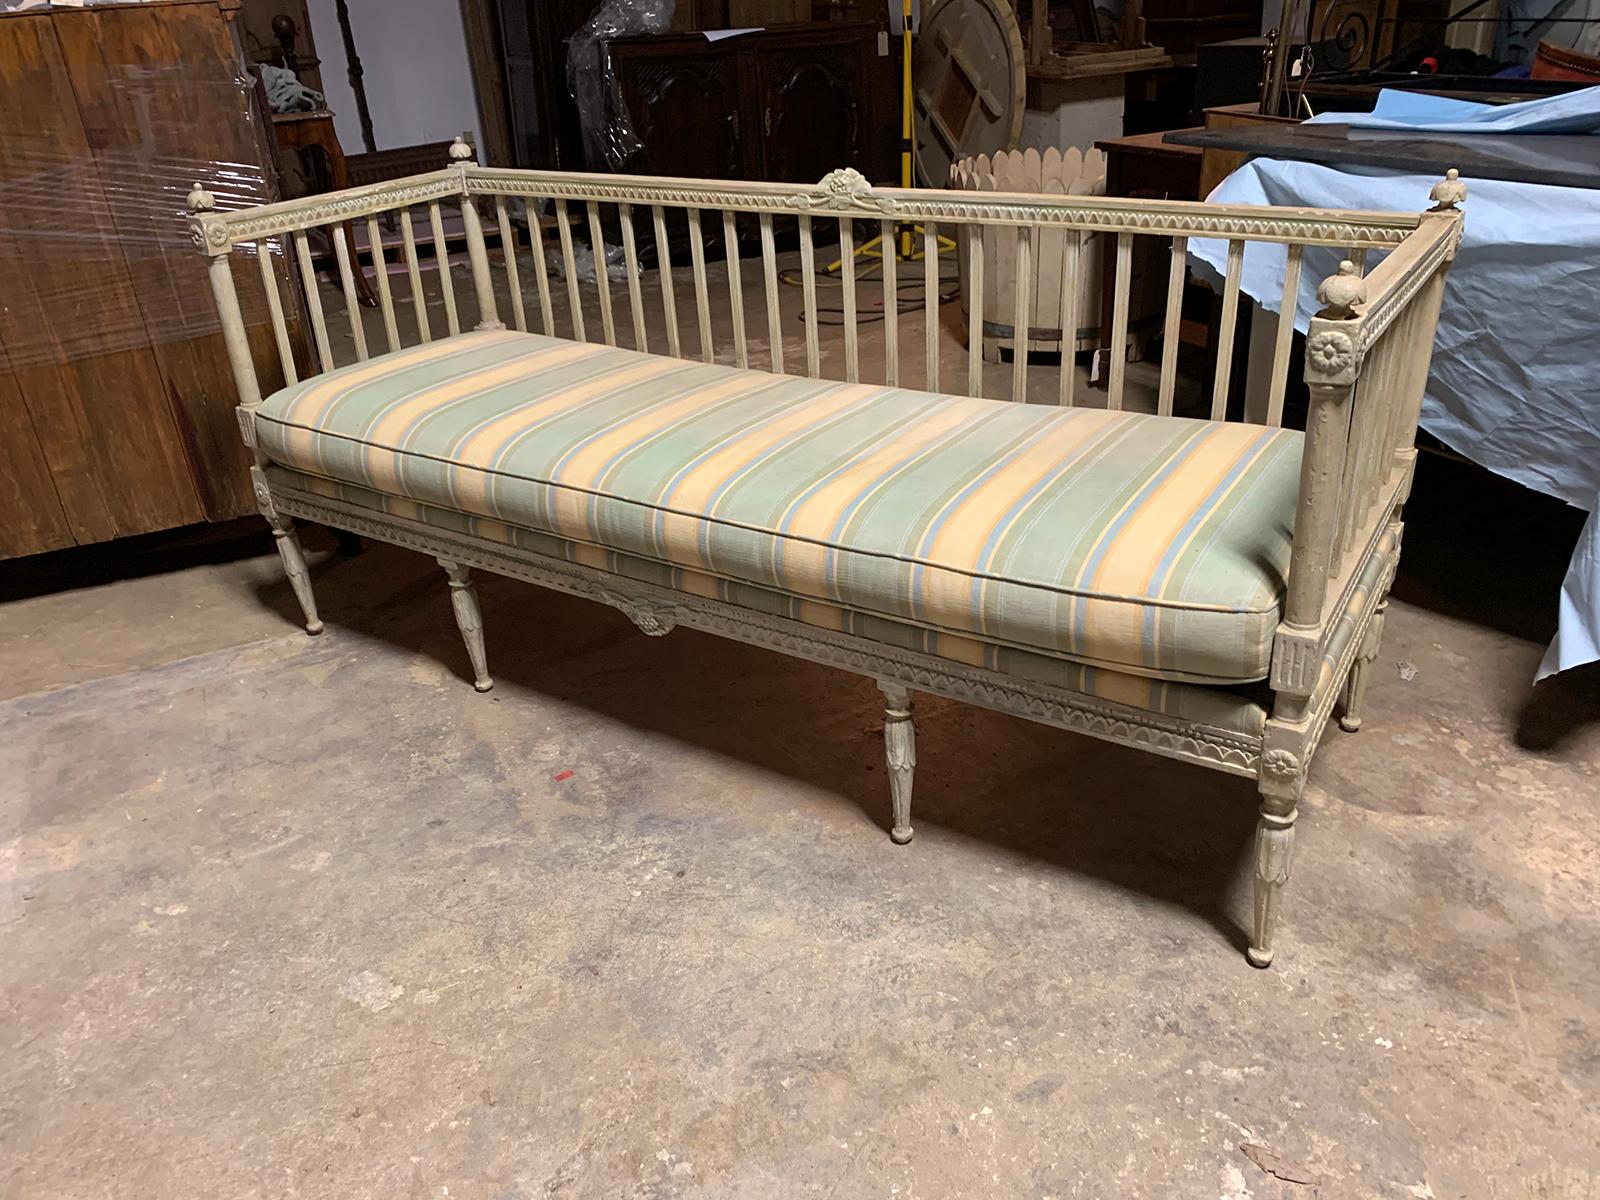 Hand-Painted 19th Century Swedish Painted Bench / Daybed / Sofa